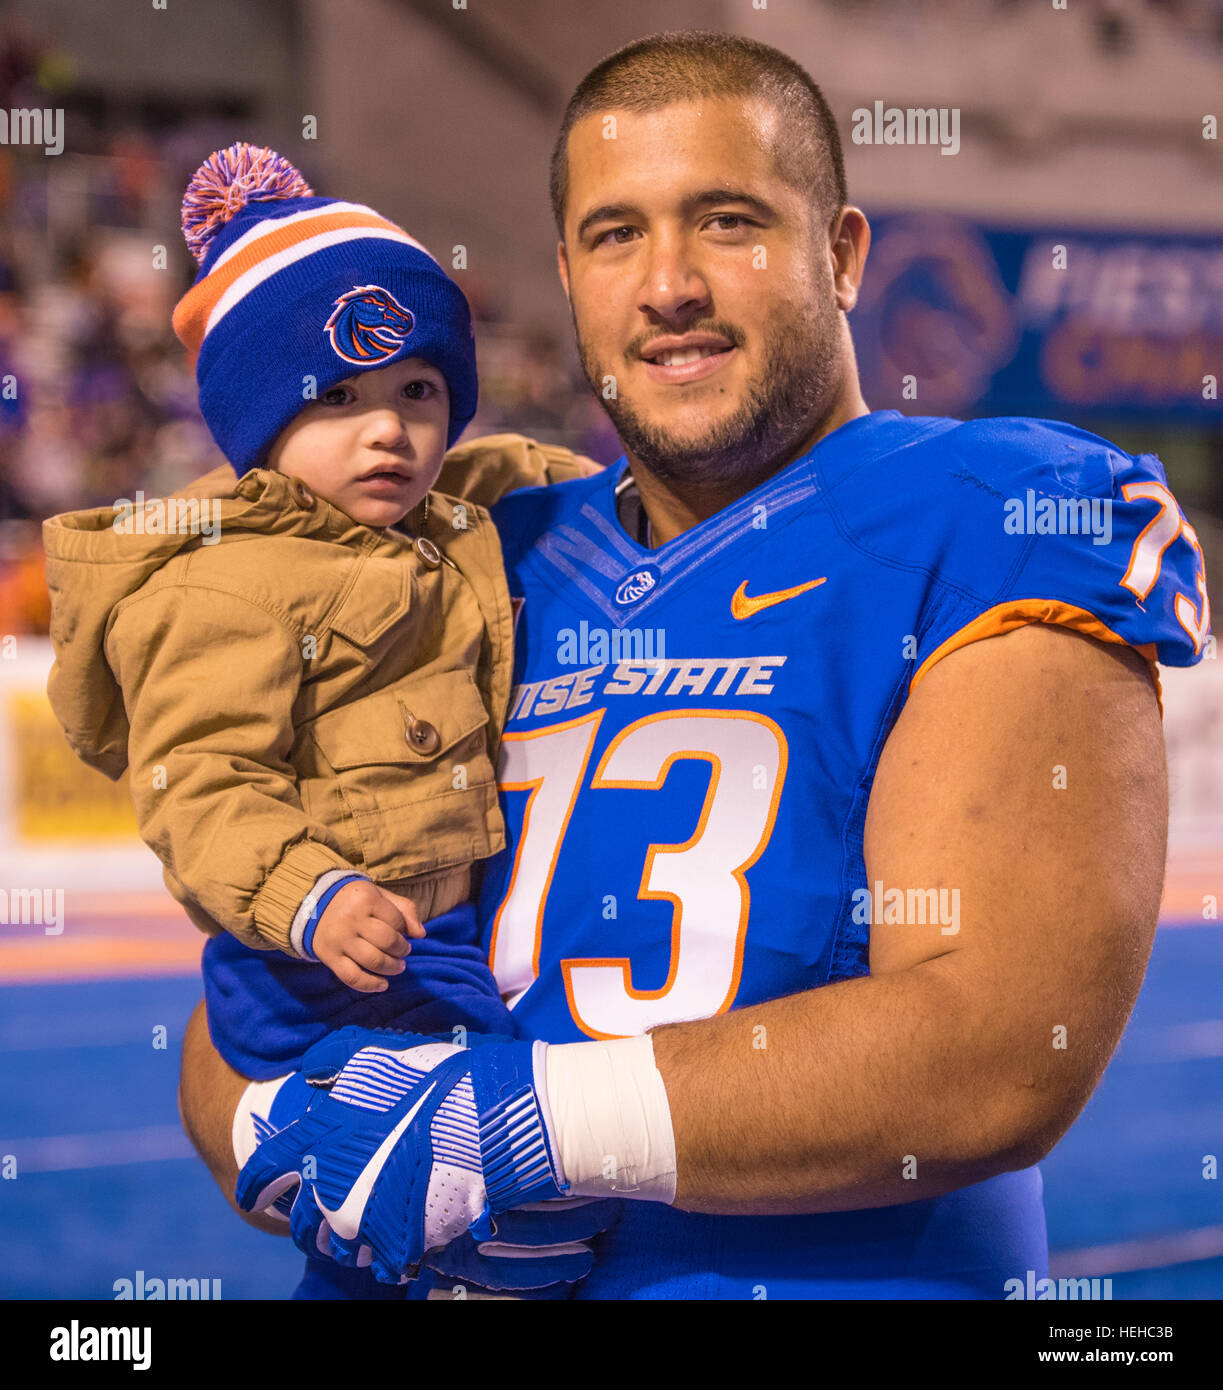 Boise State Football Game, Offensive lineman Travis Averill holding young son during Senior Day. Boise, Idaho, 2016 Stock Photo